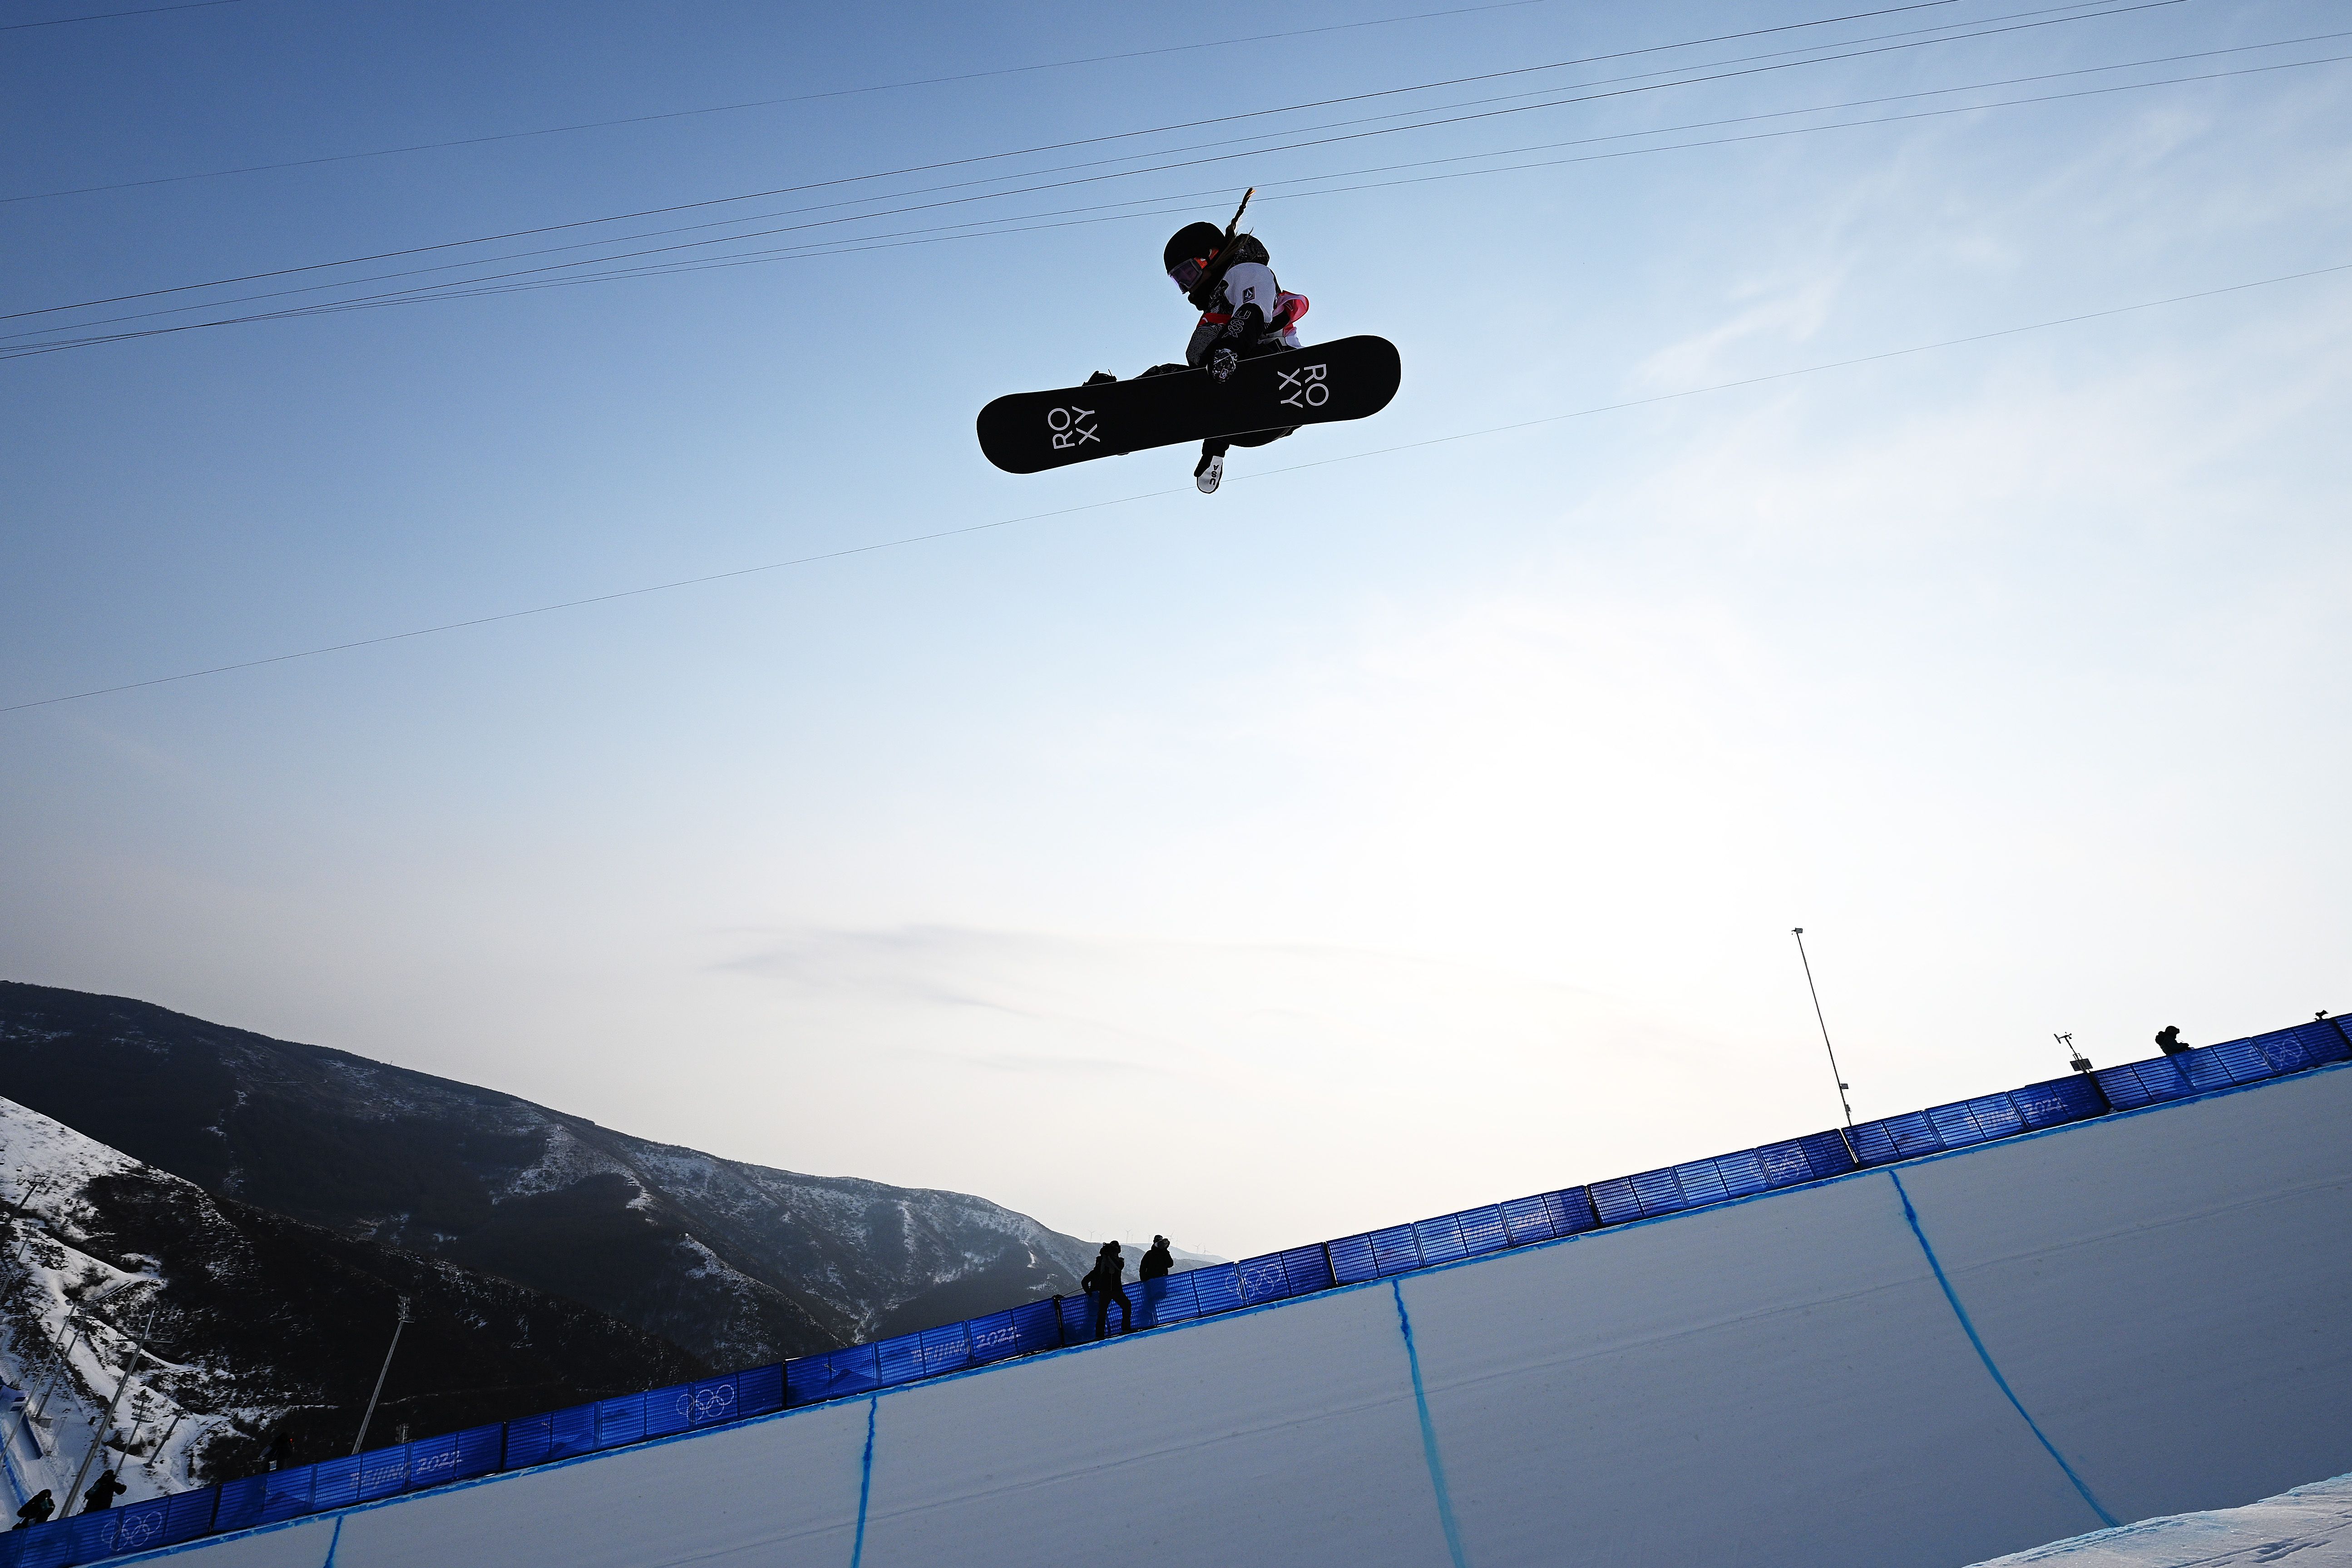 Chloe Kim of United States performs a trick during the Women's Snowboard Halfpipe Qualification on Day 5 of the inter Olympic Games on February 09, 2022 in Zhangjiakou, China. 